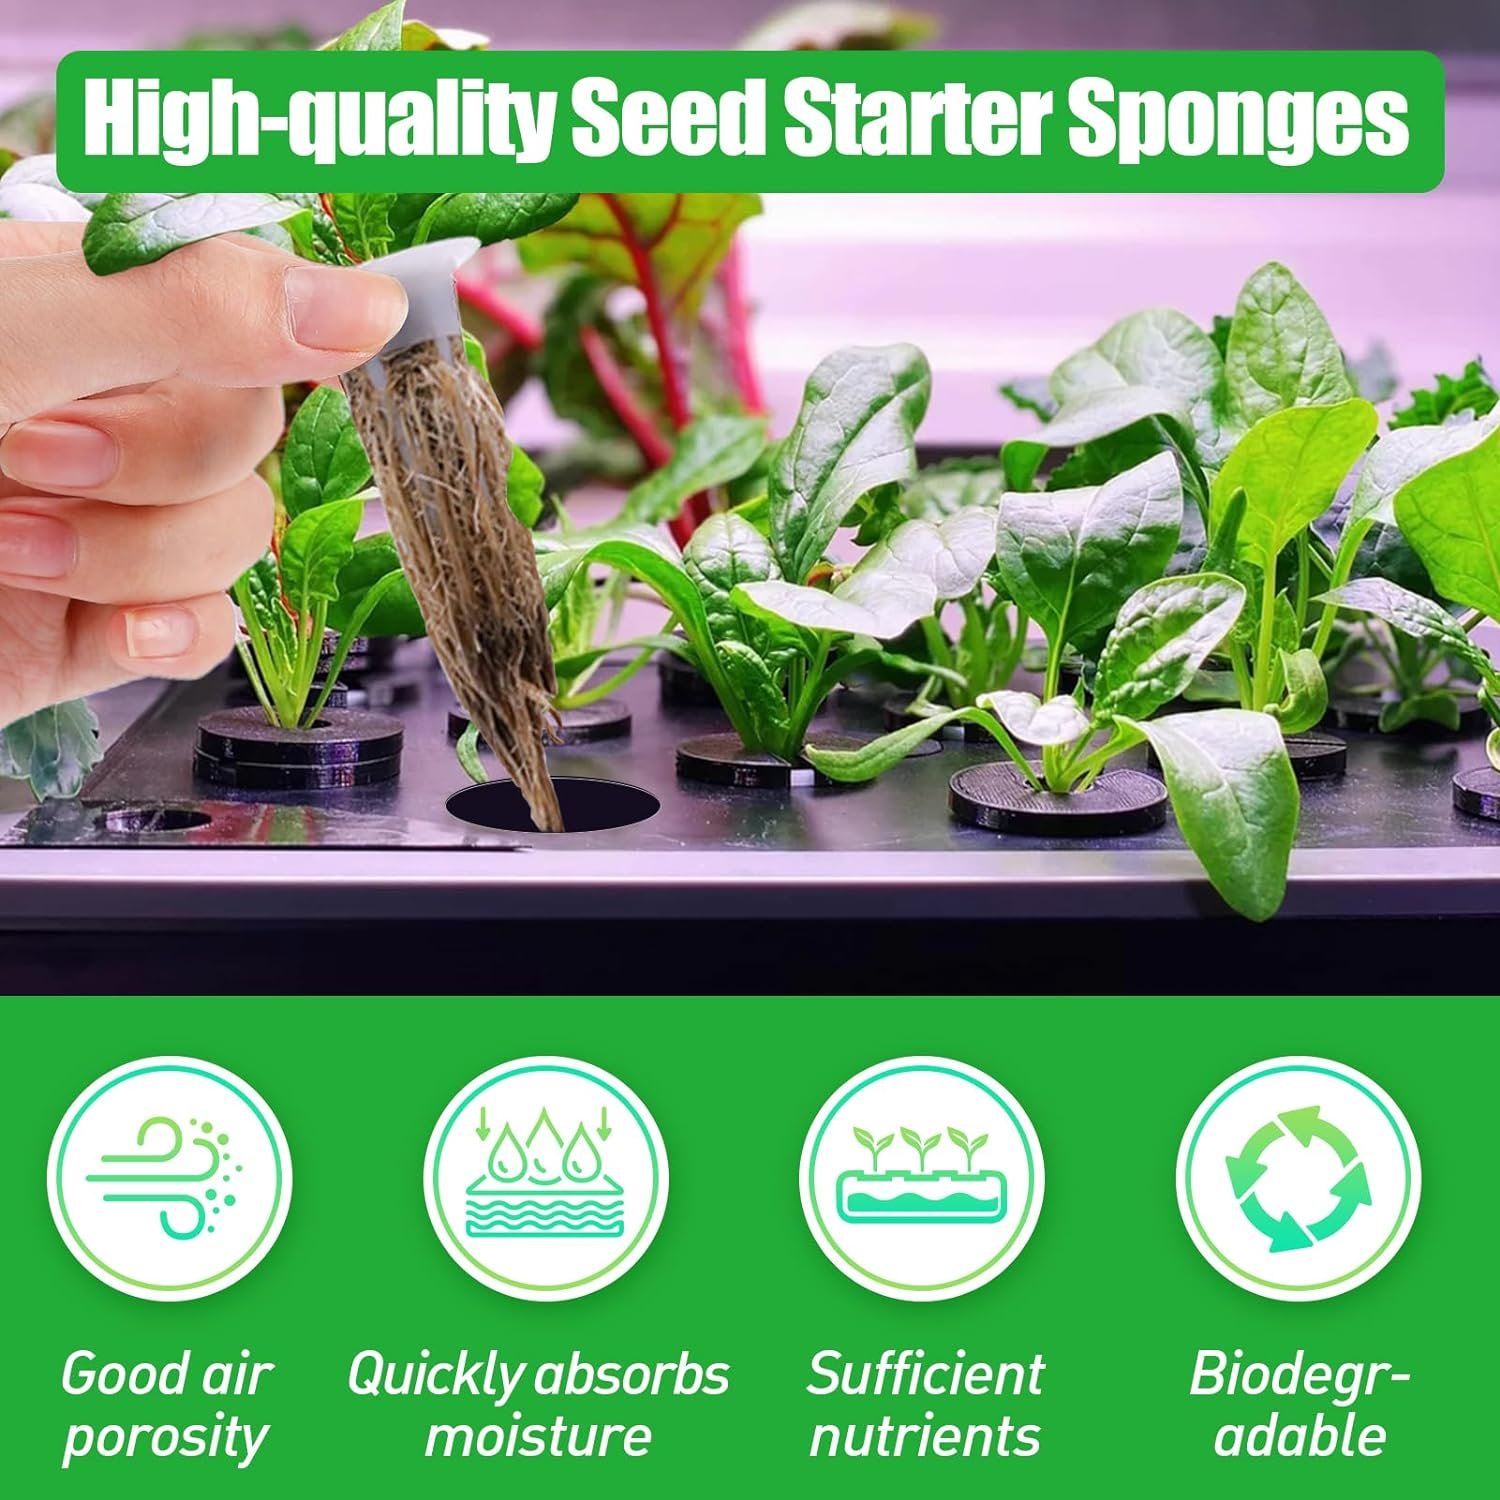 Alphatool 50 Pack Hydroponic Pods Grow Sponges- Plant Seed Starters Sponges Compatible with AeroGarden, Replacements Root Growth Sponges Kit for Indoor Hydroponic Garden Growing System